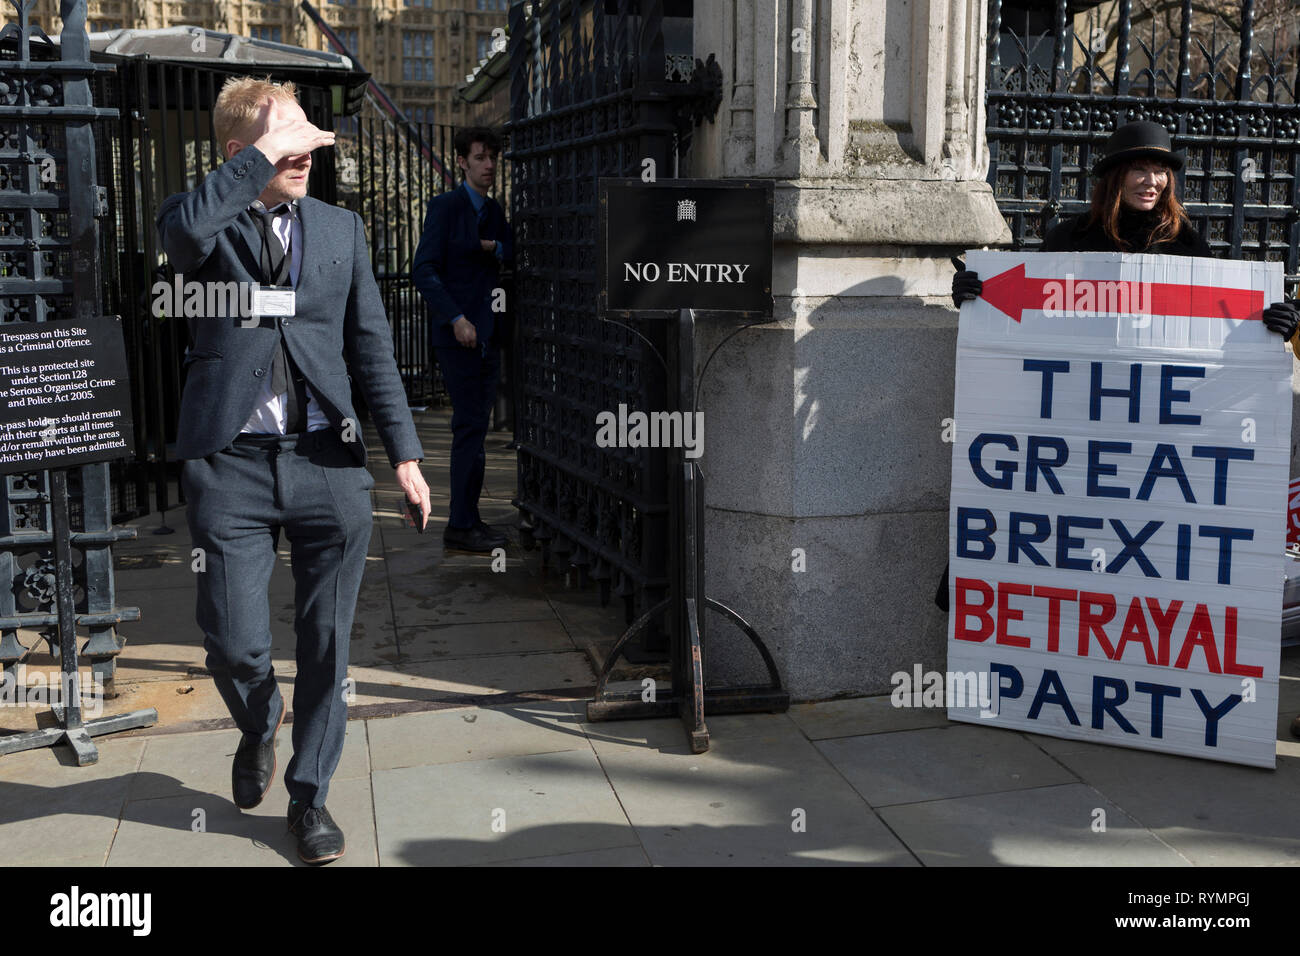 On the day that MPs in Parliament vote on a possible delay on Article 50 on EU Brexit negotiations by Prime Minister Theresa May, Brexiteer activists protest at the gates of the House of Commons, on 14th March 2019, in Westminster, London, England. Stock Photo